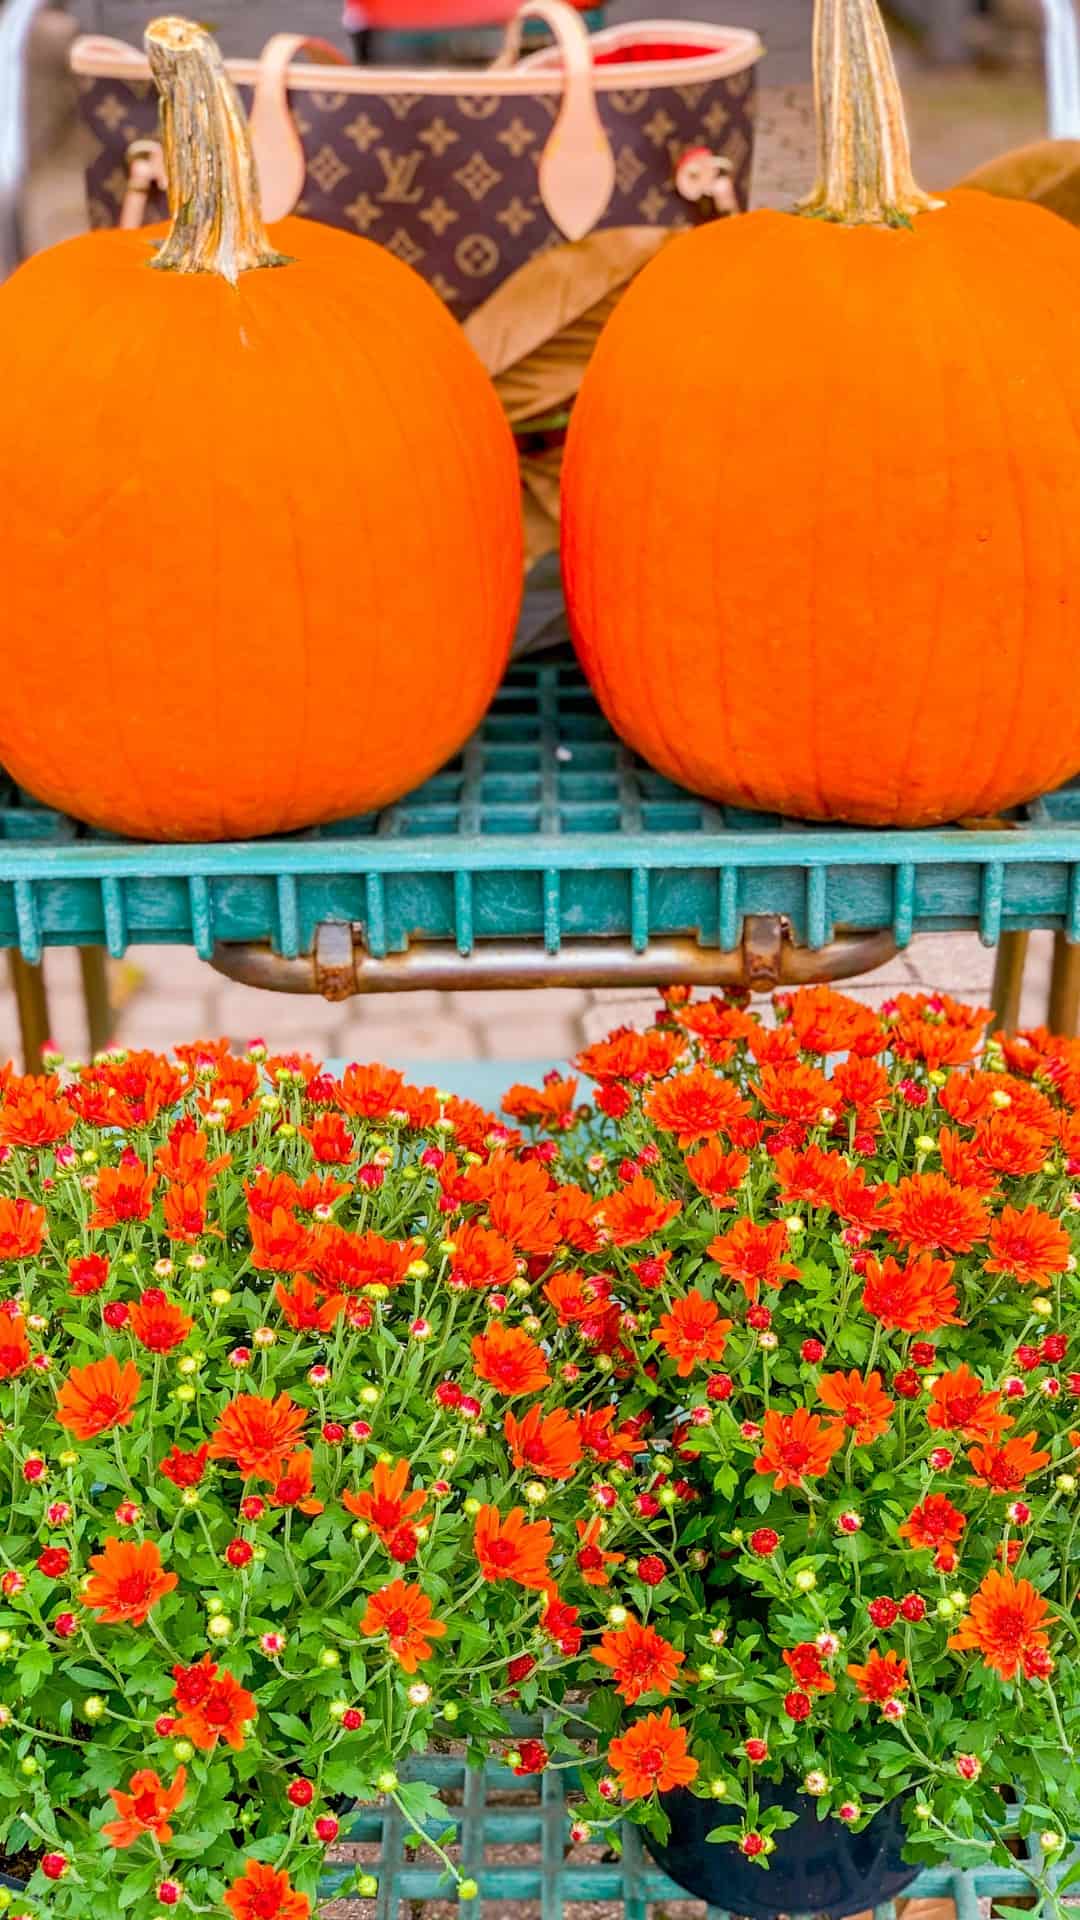 Pumpkins and orange flowers on a table - Cozy, cute fall